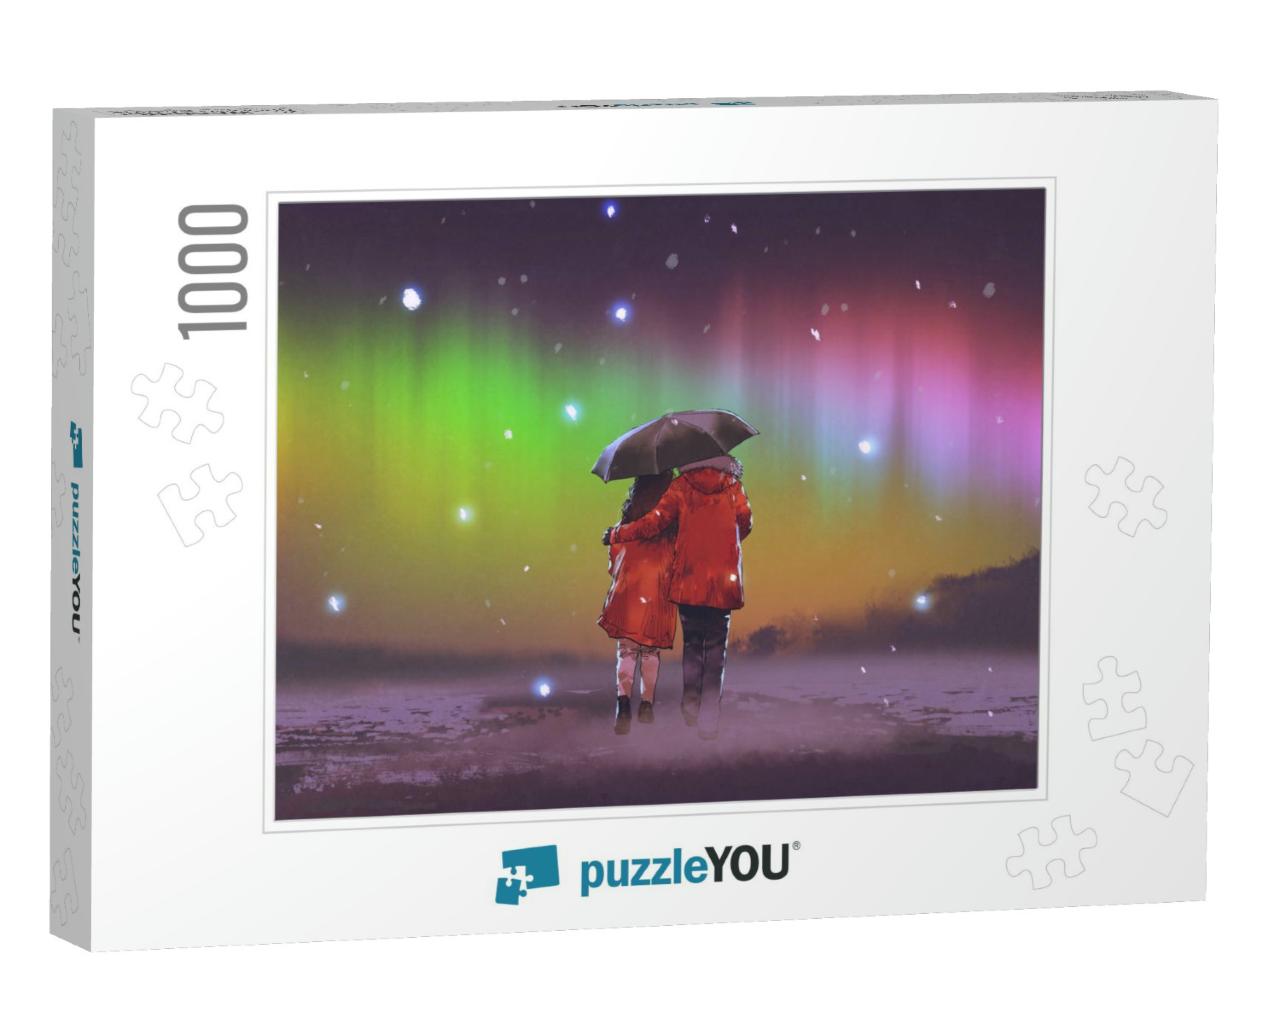 Couple in Red Coat Under an Umbrella Walking on Snow Look... Jigsaw Puzzle with 1000 pieces